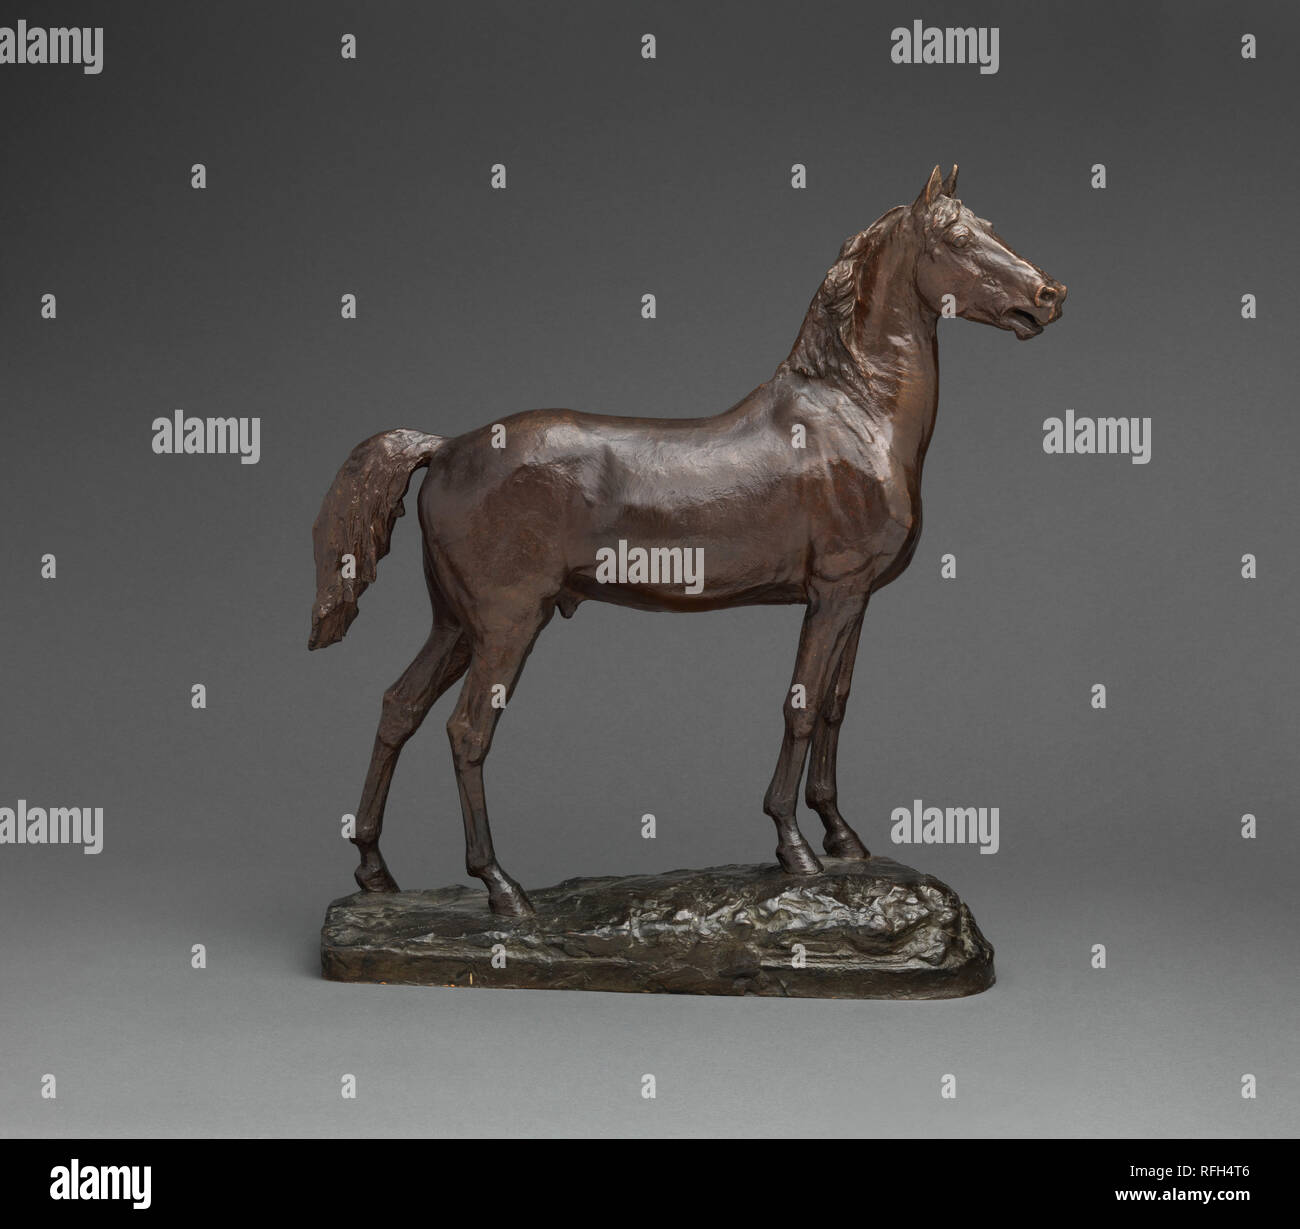 Study of the Horse for the Statue of Major General George Henry Thomas. Artist: John Quincy Adams Ward (American, Urbana, Ohio 1830-1910 New York). Dimensions: 20 x 18 x 5 in. (50.8 x 45.7 x 12.7 cm). Date: 1879, cast after 1910.  This statuette was cast after a preliminary model for the horse in Ward's bronze equestrian statue of Major General George Henry Thomas (1816-1870), a Union officer during the Civil War. The monument was commissioned in 1874 by the Society of the Army of the Cumberland and unveiled in 1879; it stands in Thomas Circle at the intersections of Massachusetts and Vermont  Stock Photo